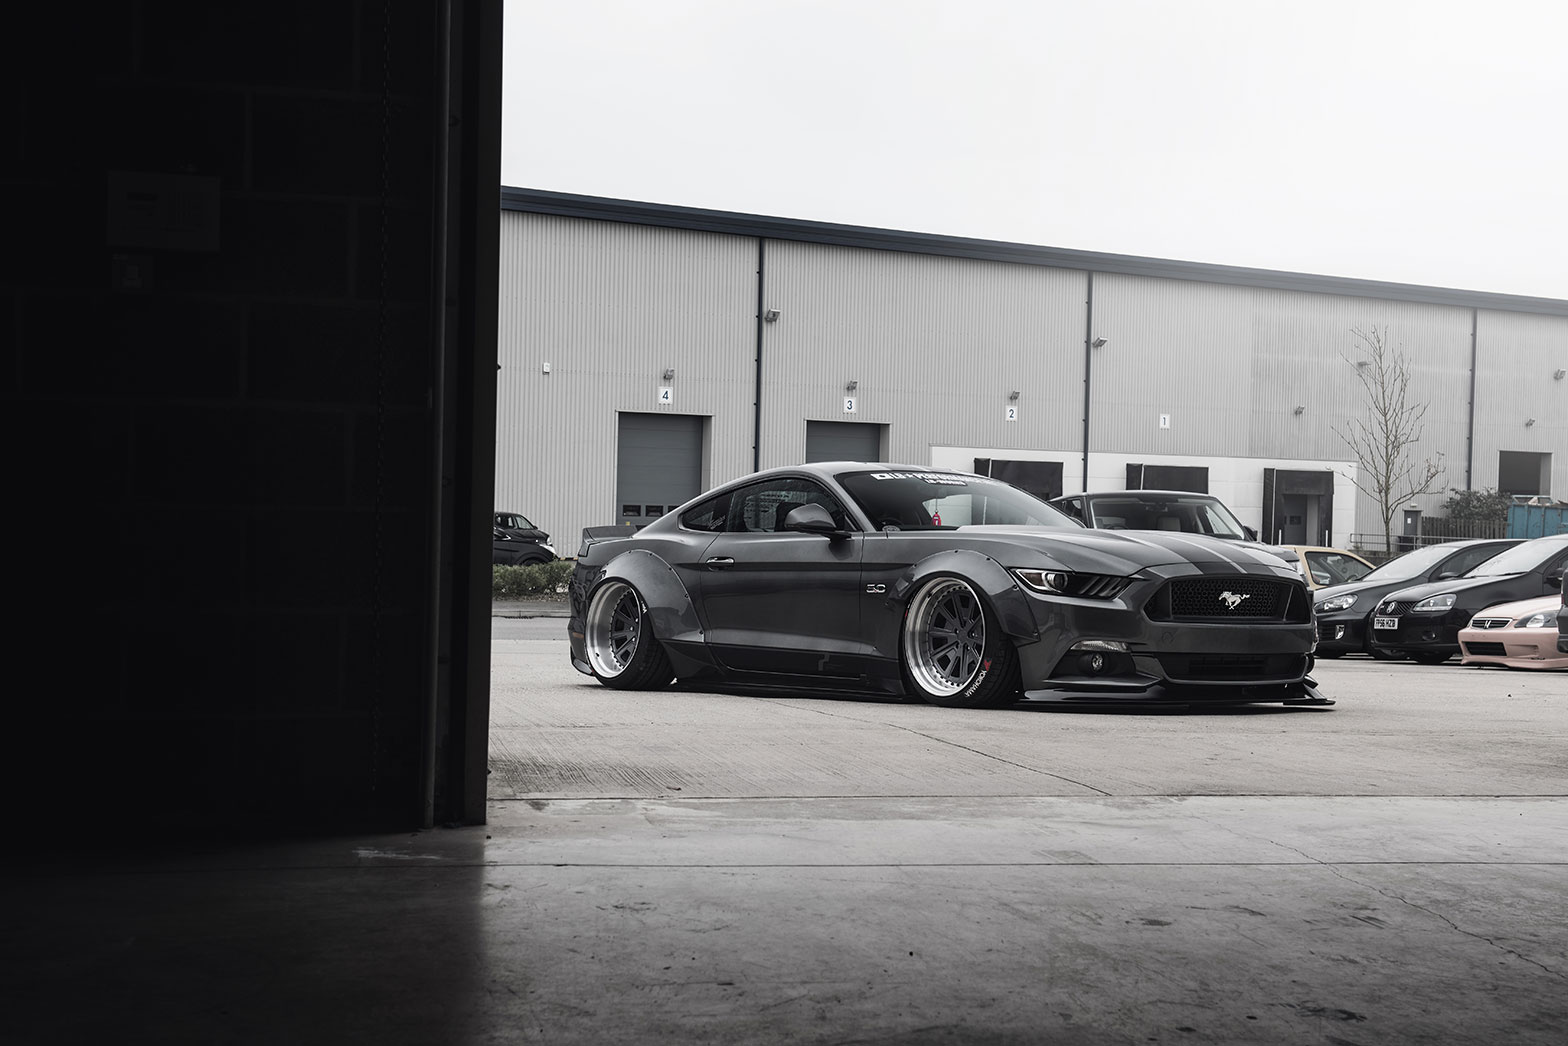 Check our price and buy Liberty Walk Body kit for Ford Mustang!